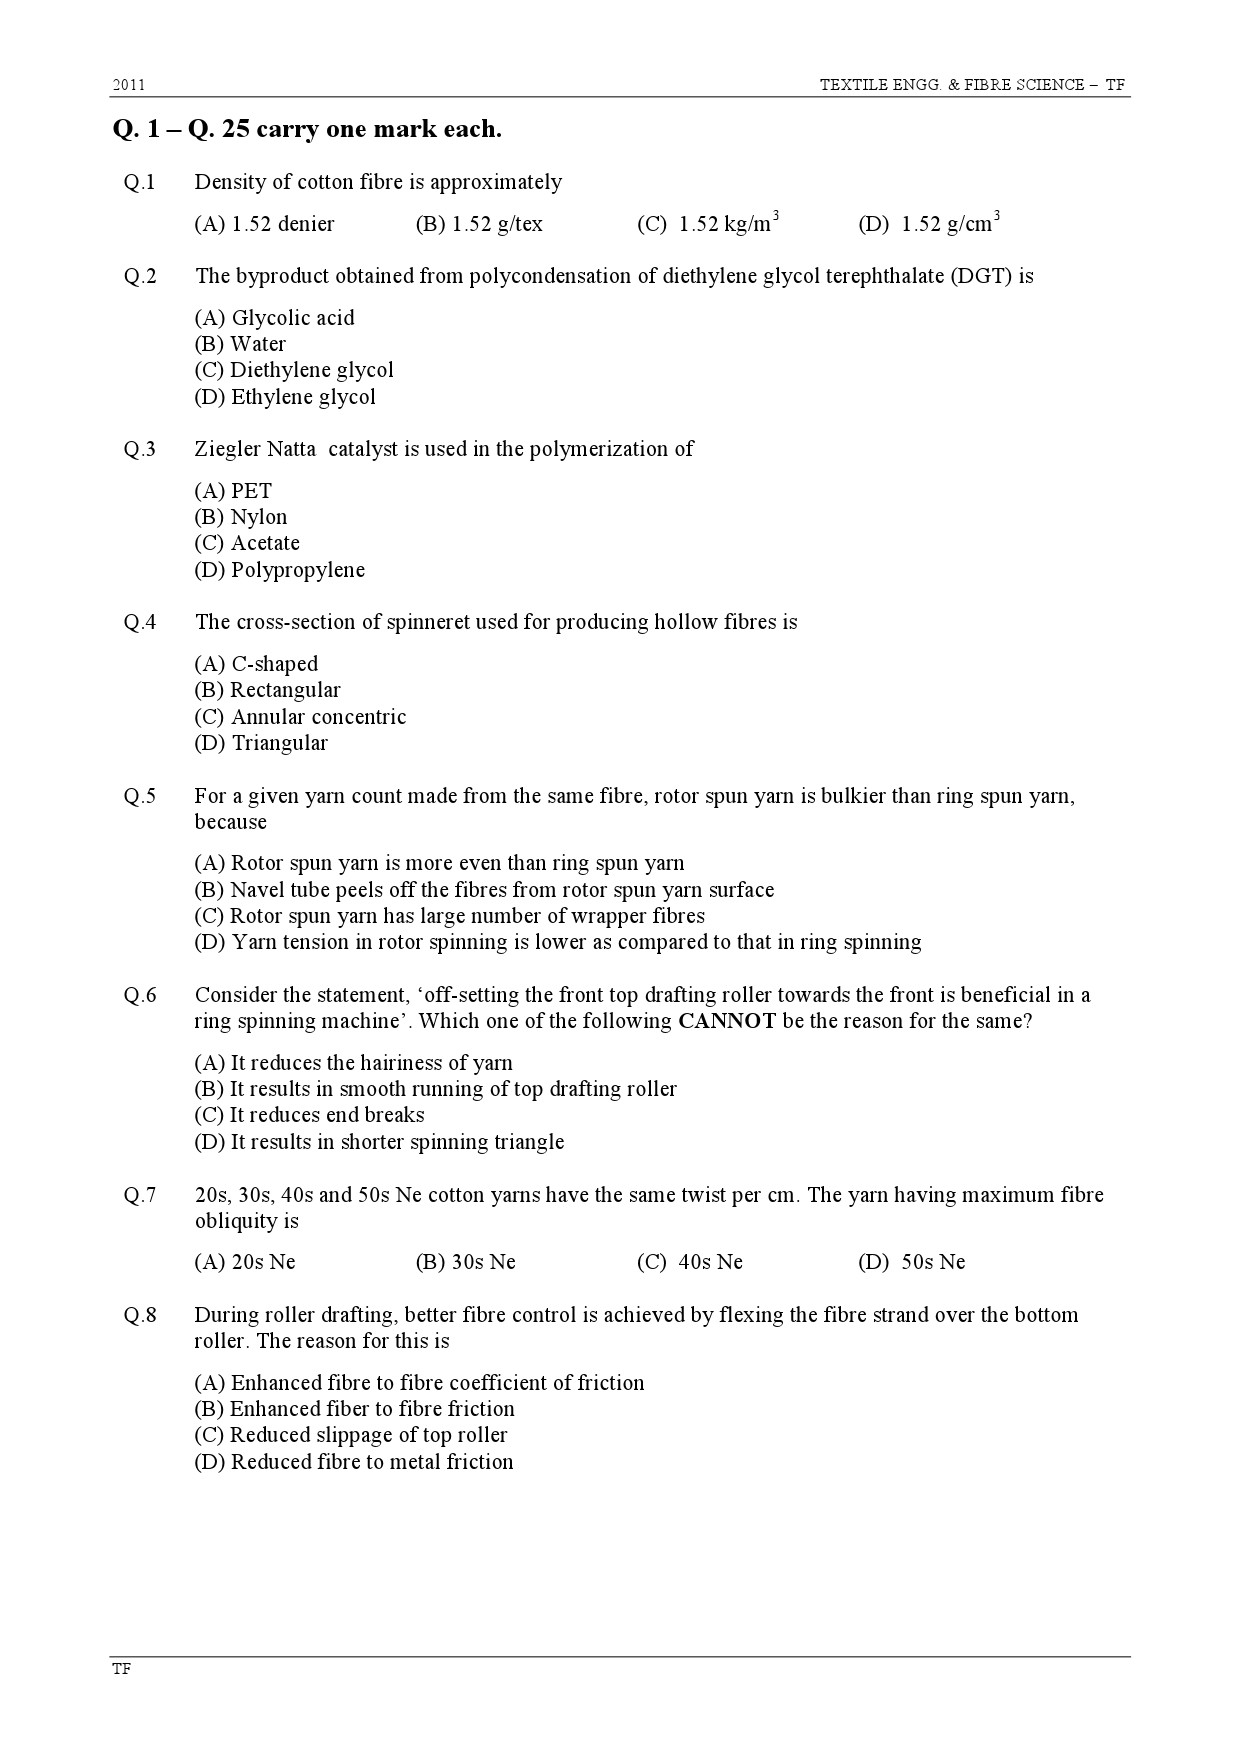 GATE Exam Question Paper 2011 Textile Engineering and Fibre Science 2